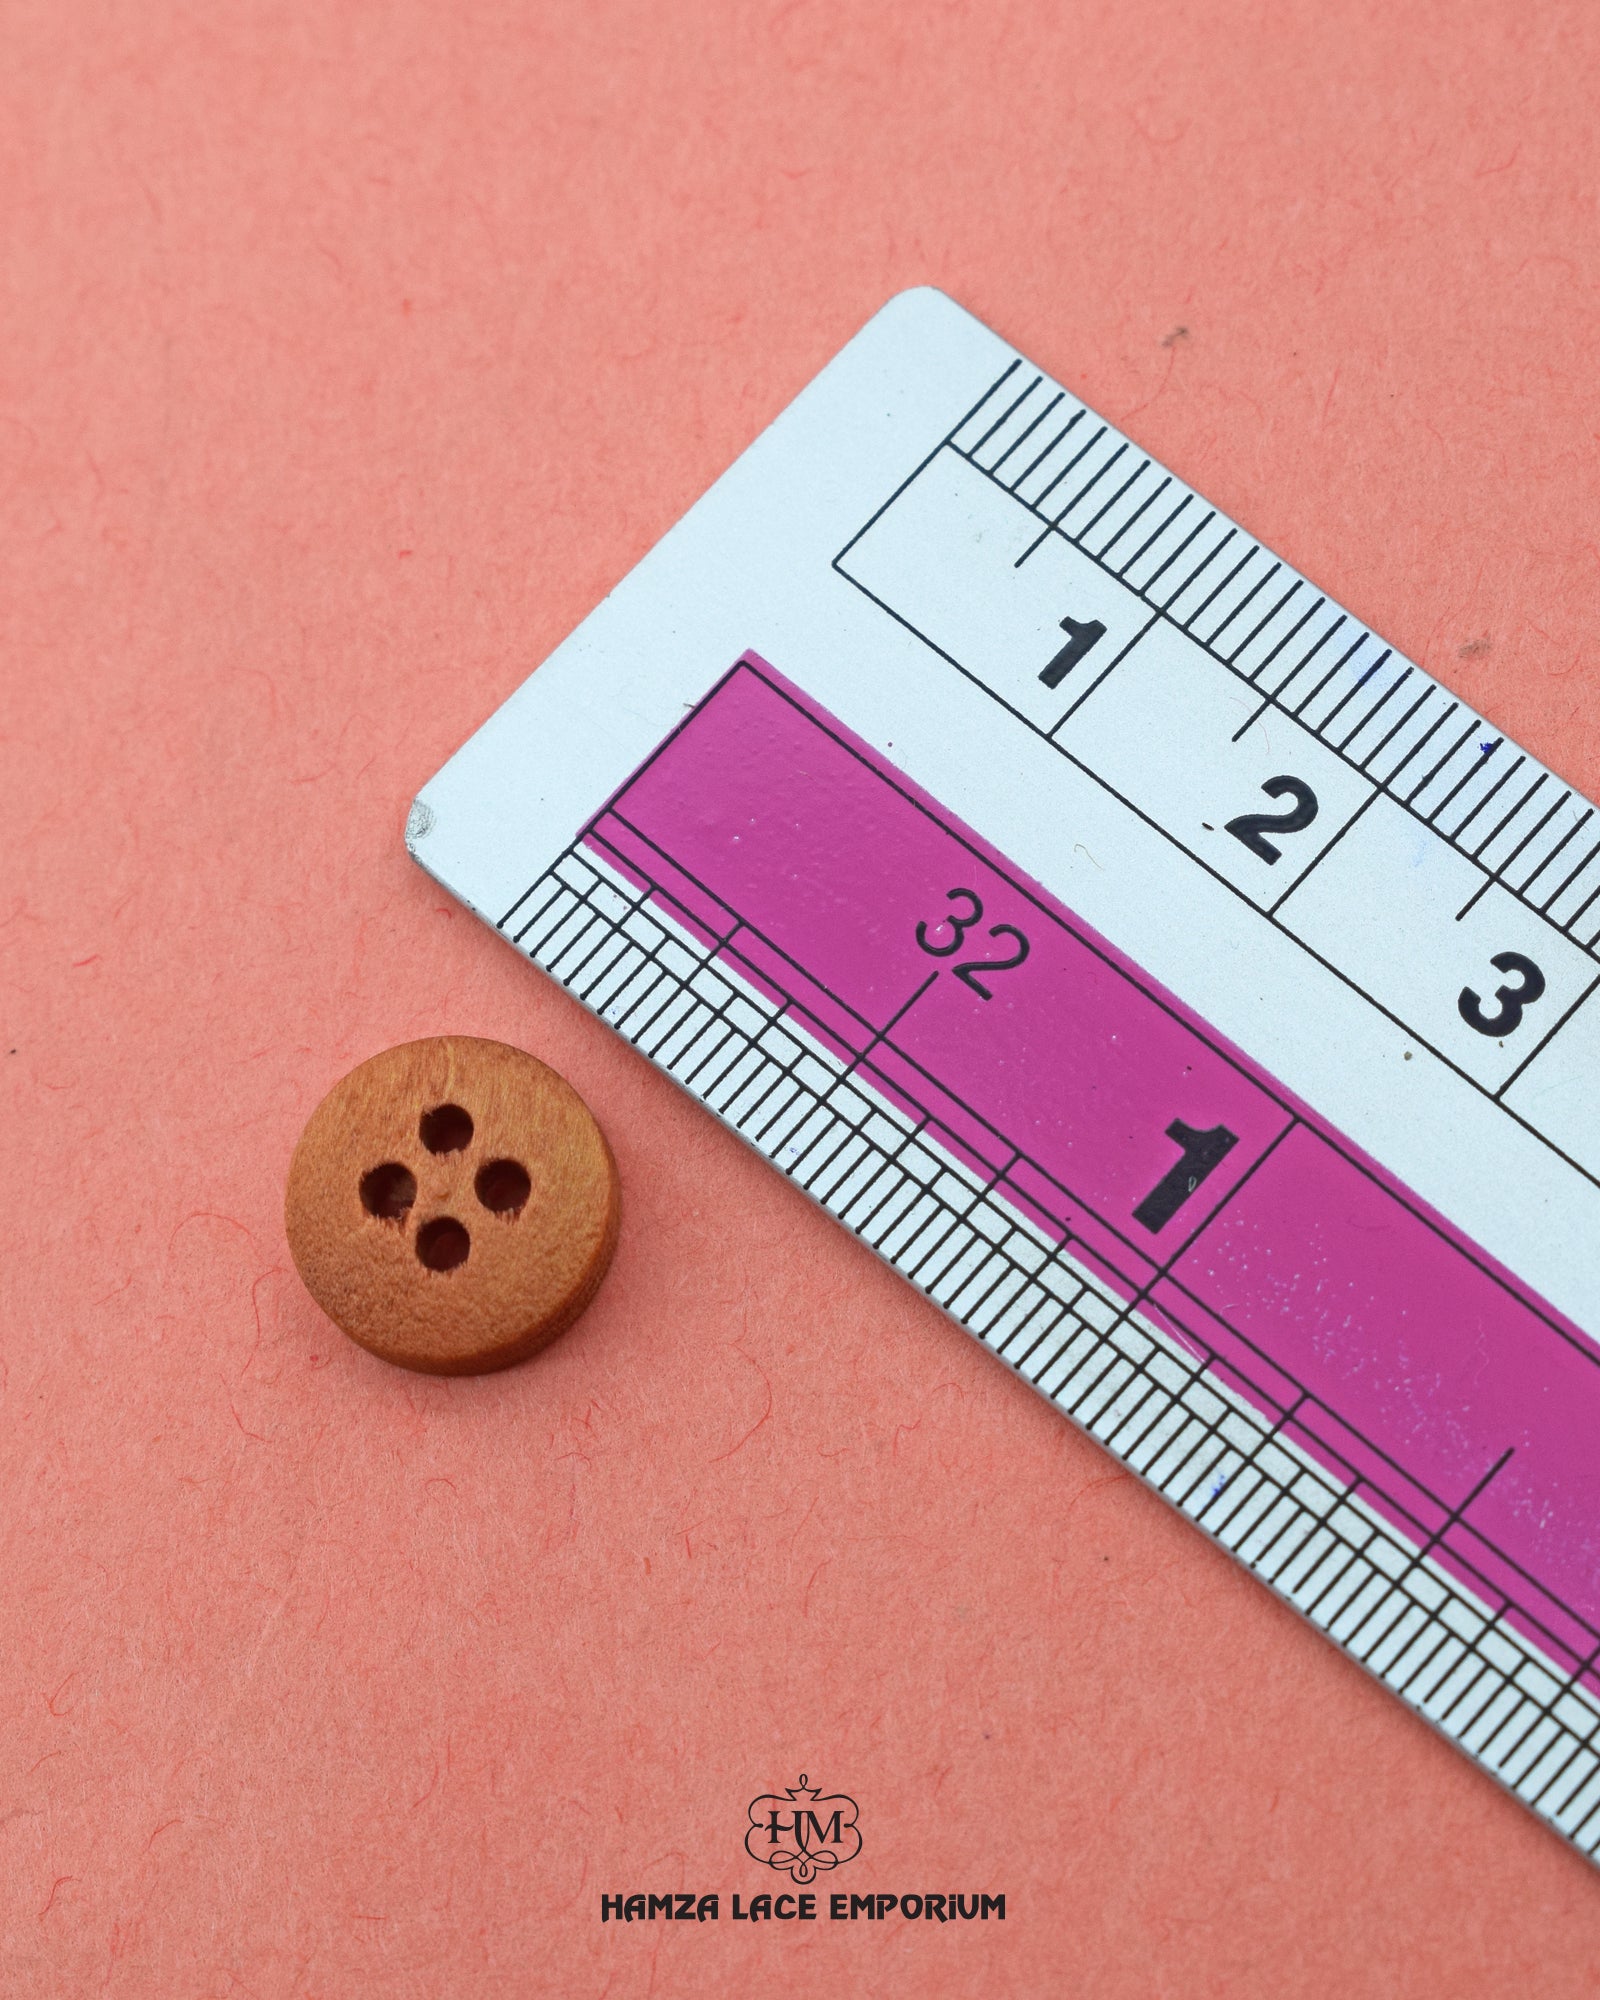 Size of the 'Circular Wood Button WB76' is shown with a ruler